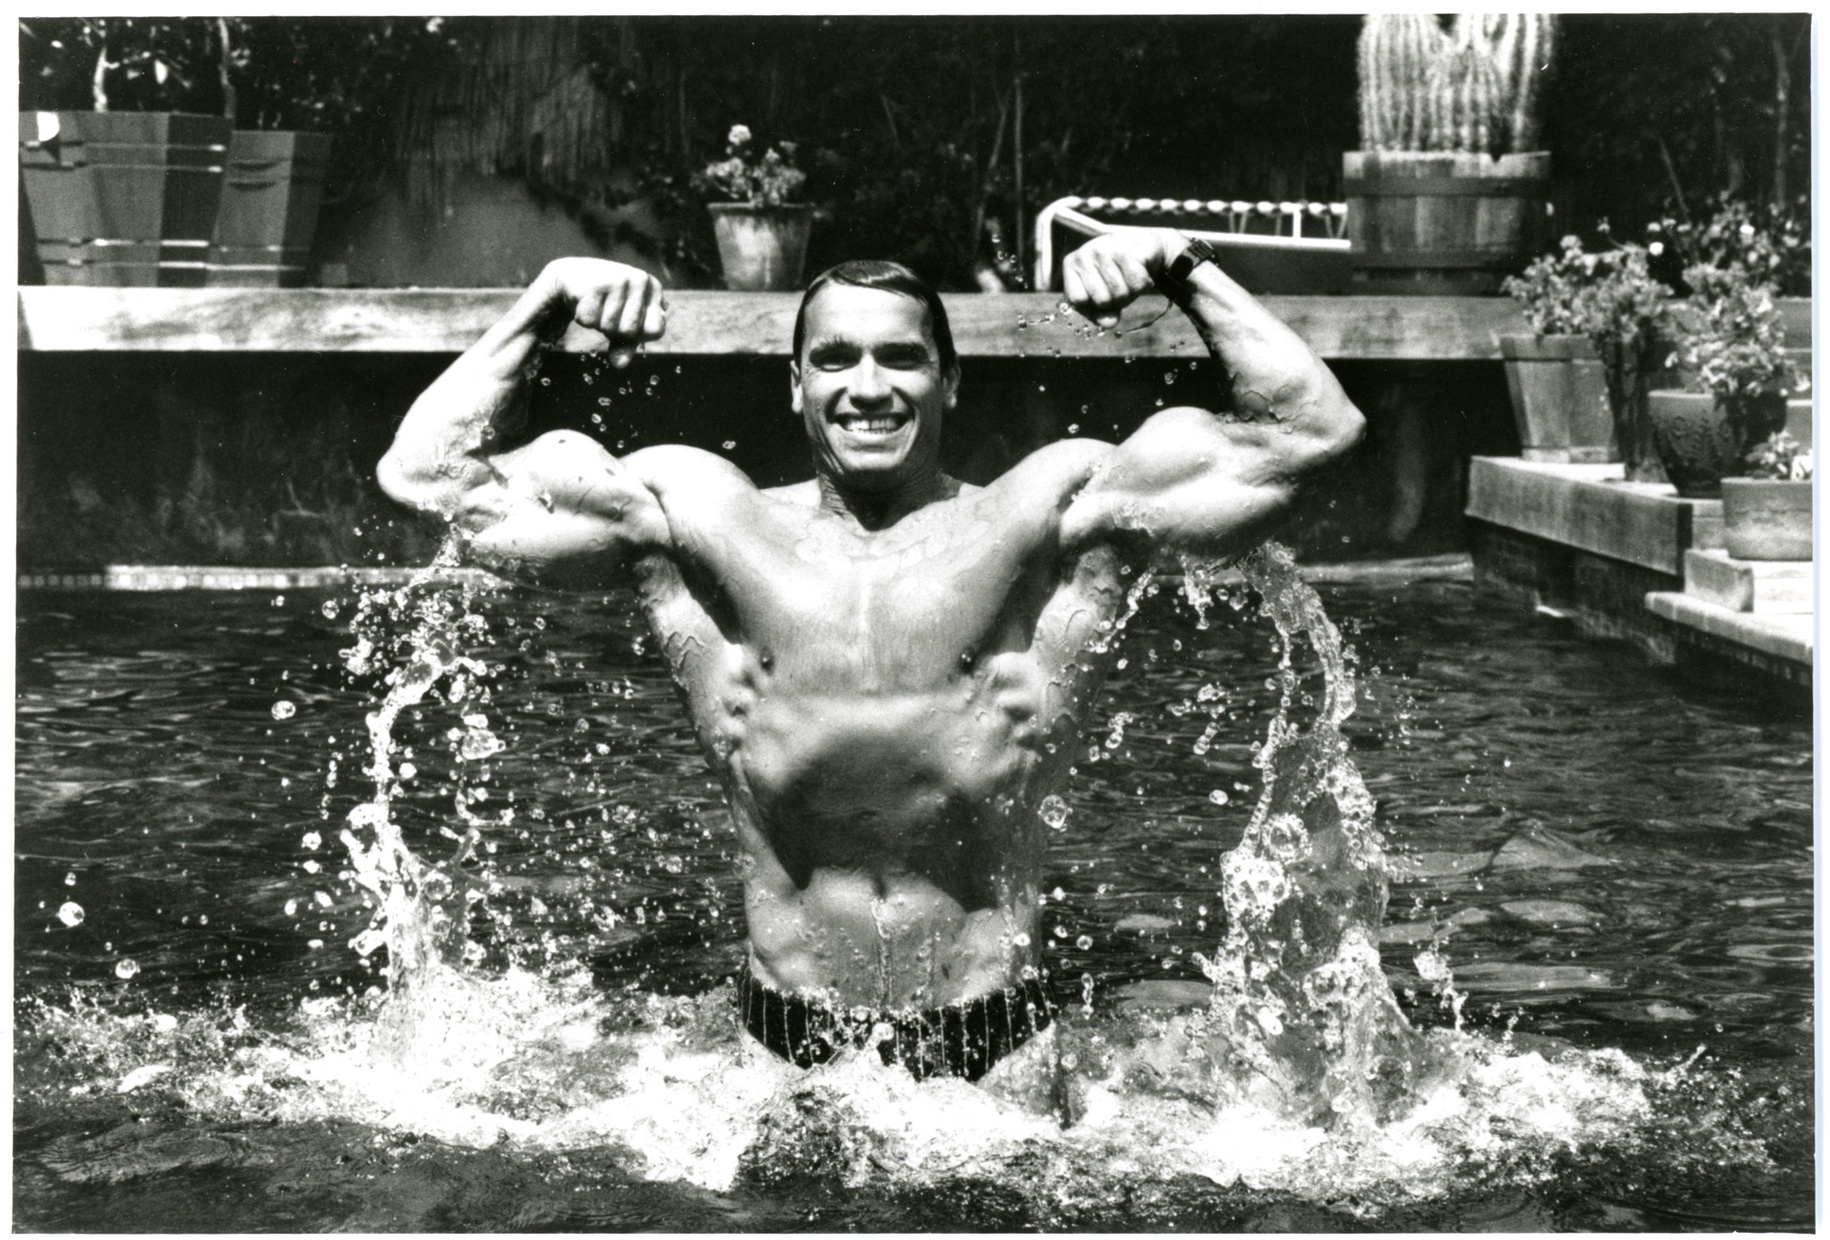 A black and white photograph of Arnold Schwarzenegger jumping out of a pool smiling and flexing.